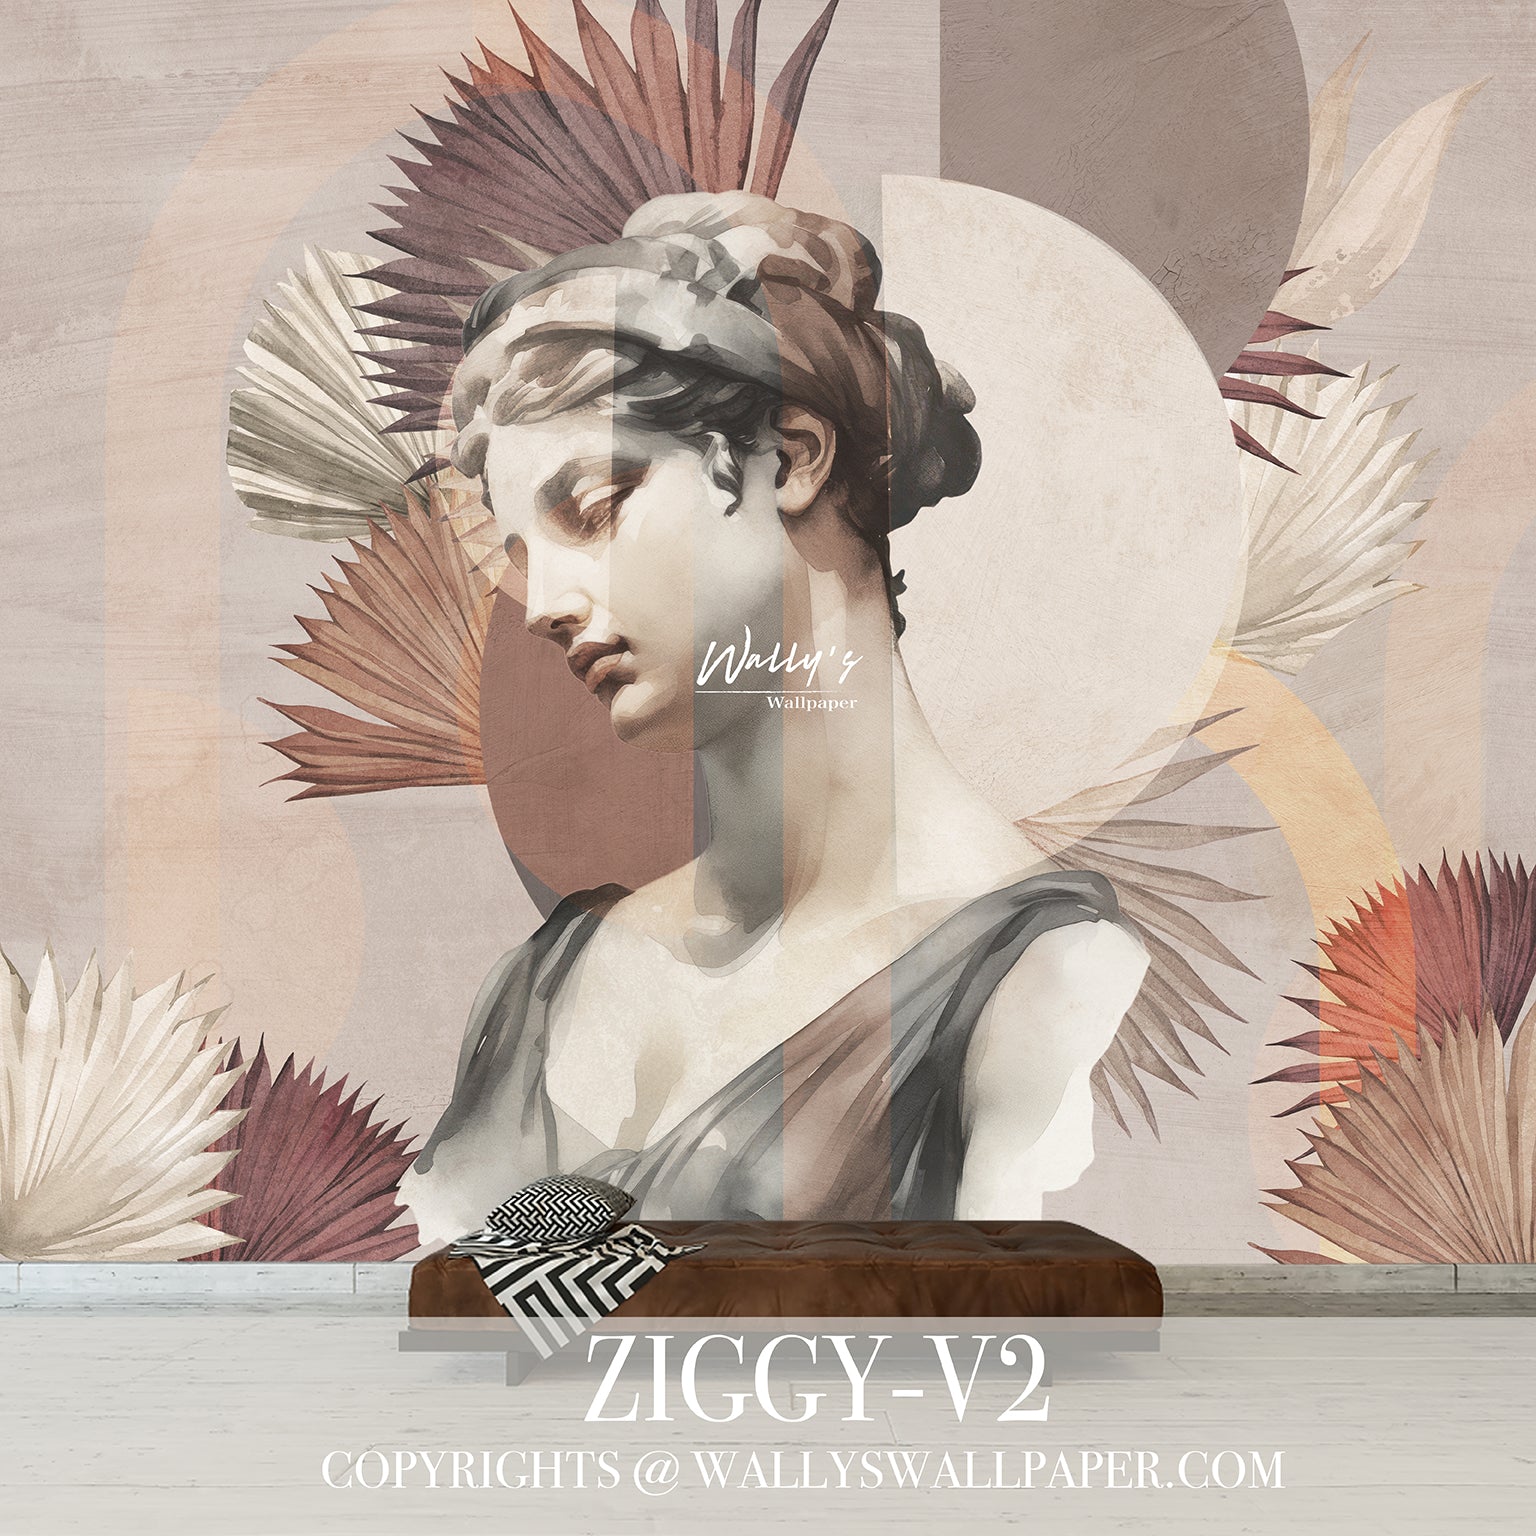 wallpaper in Grege and beige of a roman girl with oasis leaves in an interior living room 